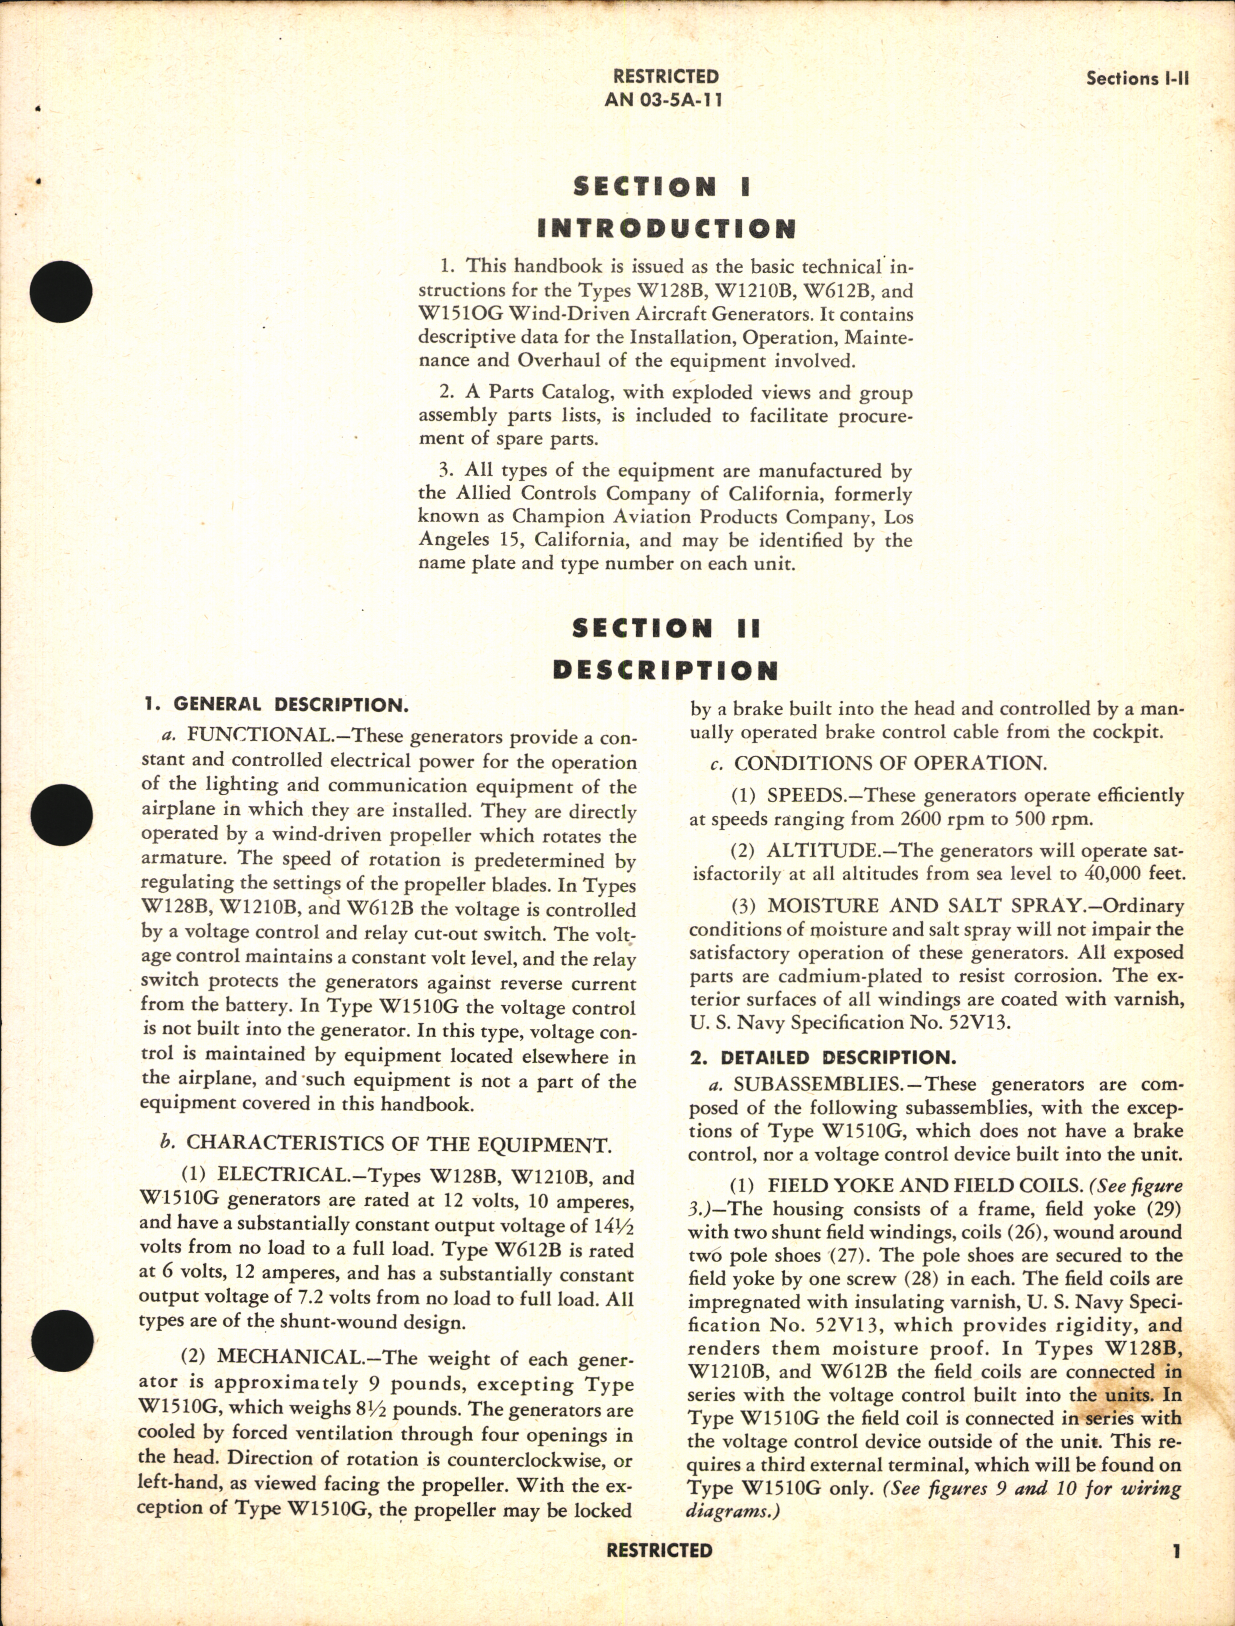 Sample page 5 from AirCorps Library document: Handbook of Instructions with Parts Catalog for Wind Driven Aircraft Generators